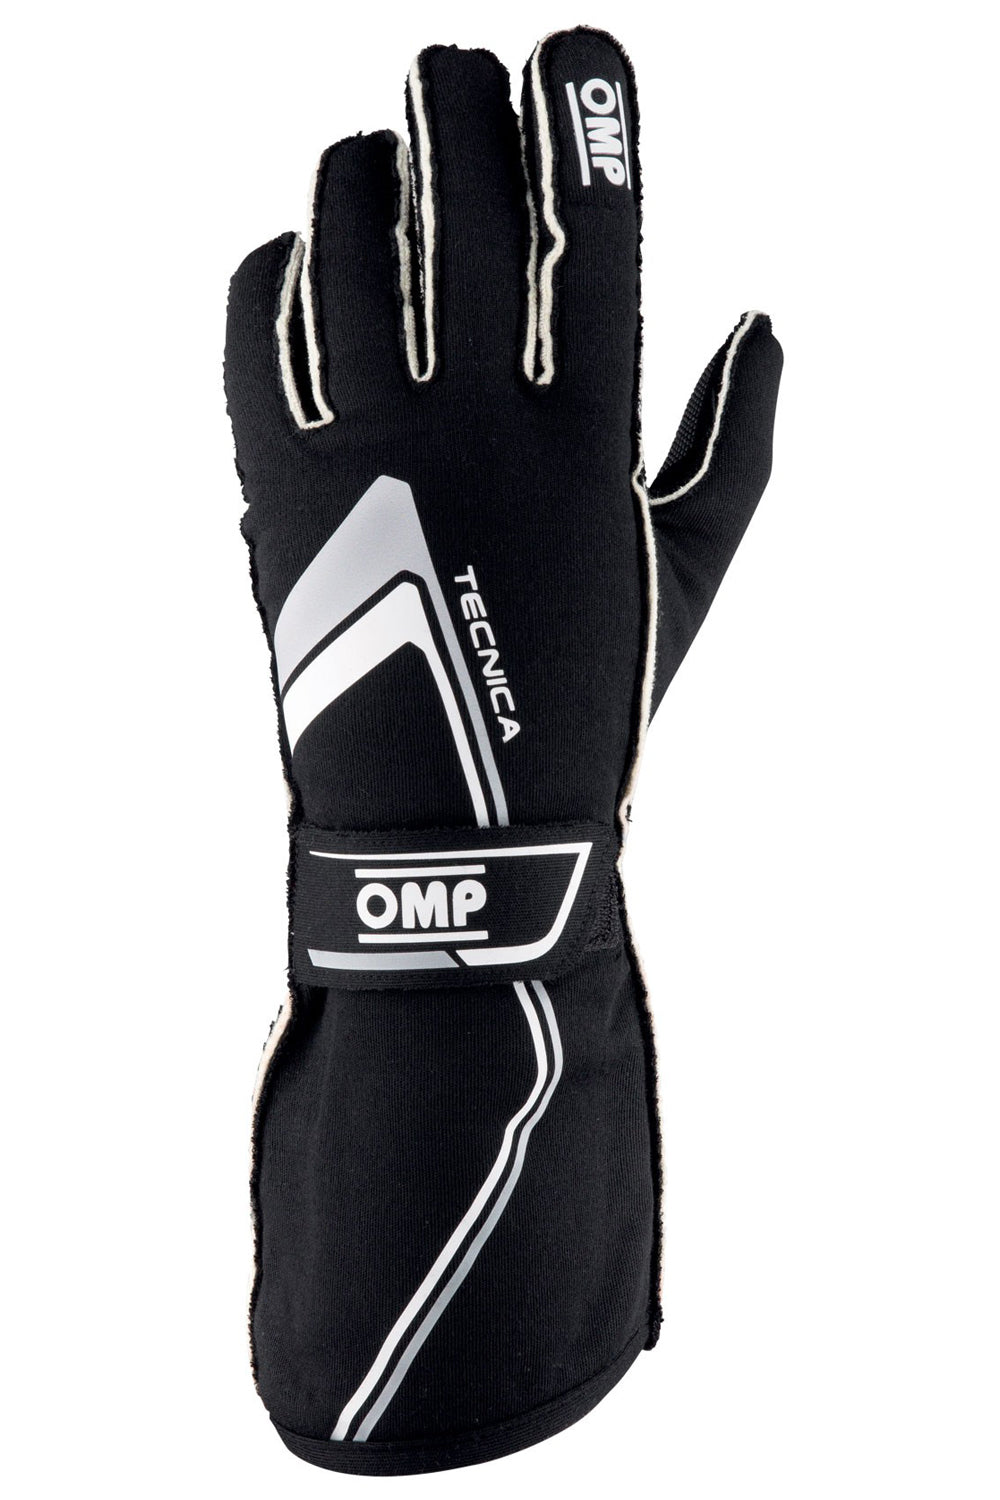 TECNICA Gloves Black And White Size X Large